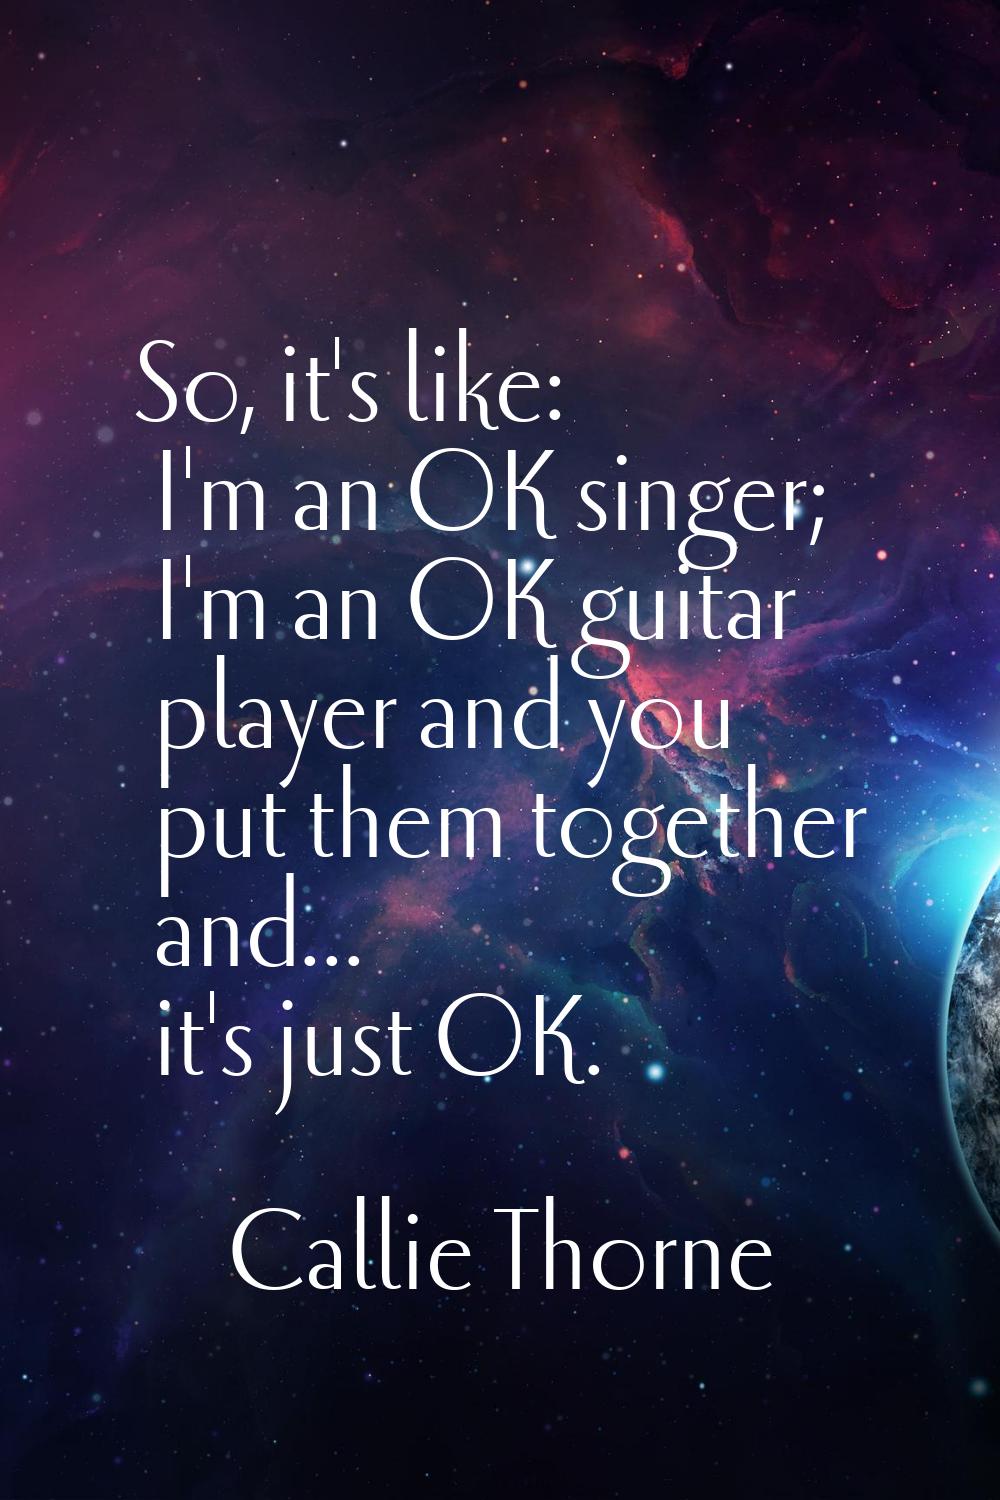 So, it's like: I'm an OK singer; I'm an OK guitar player and you put them together and... it's just